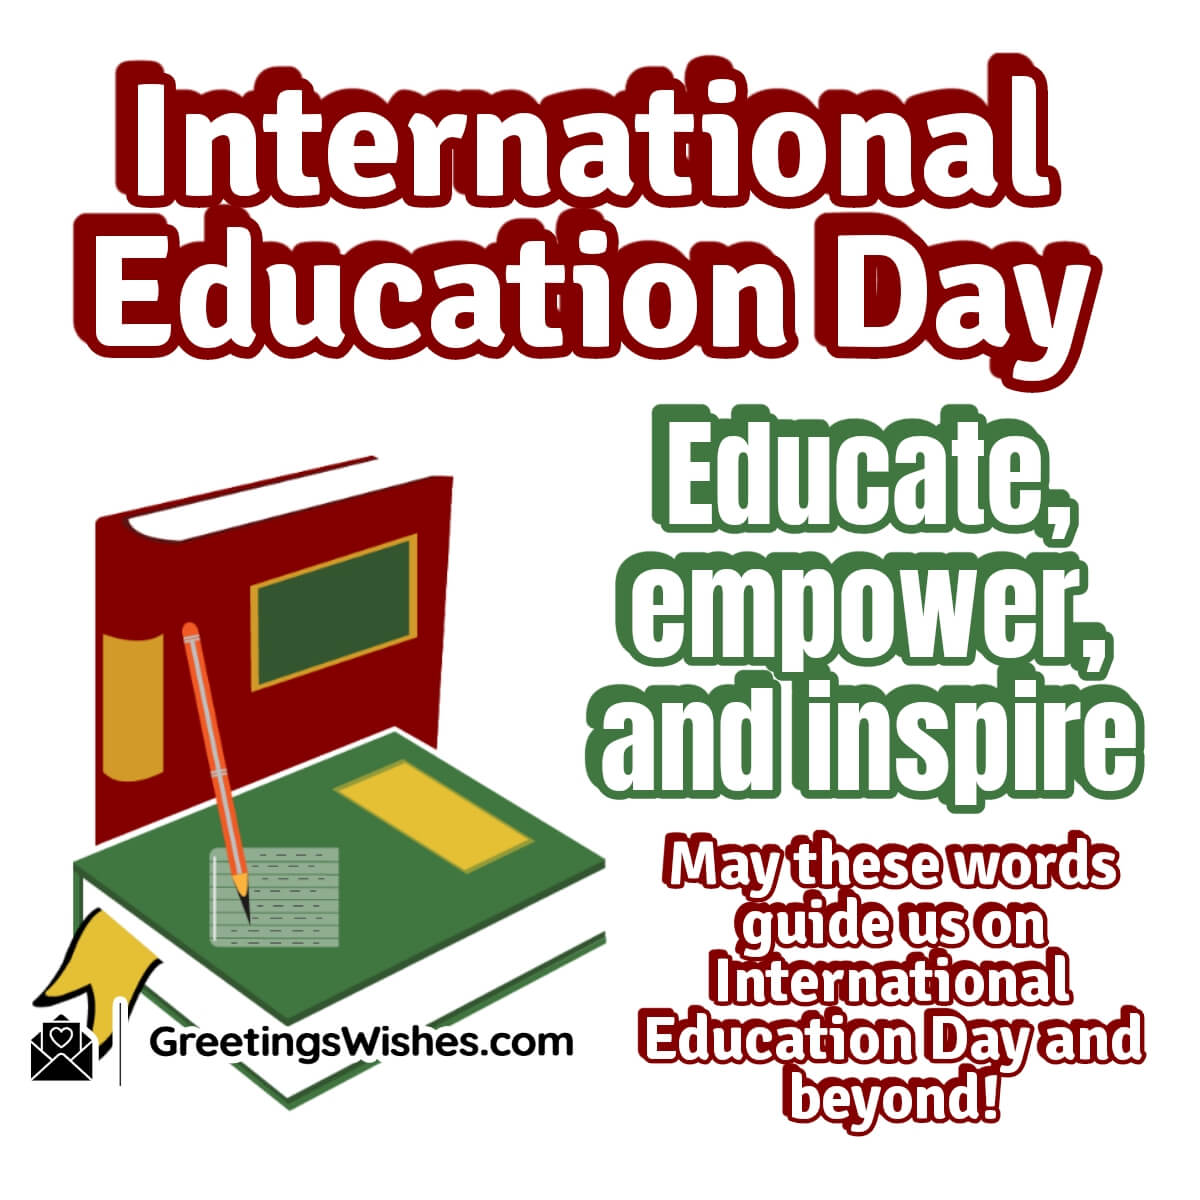 International Education Day Messages